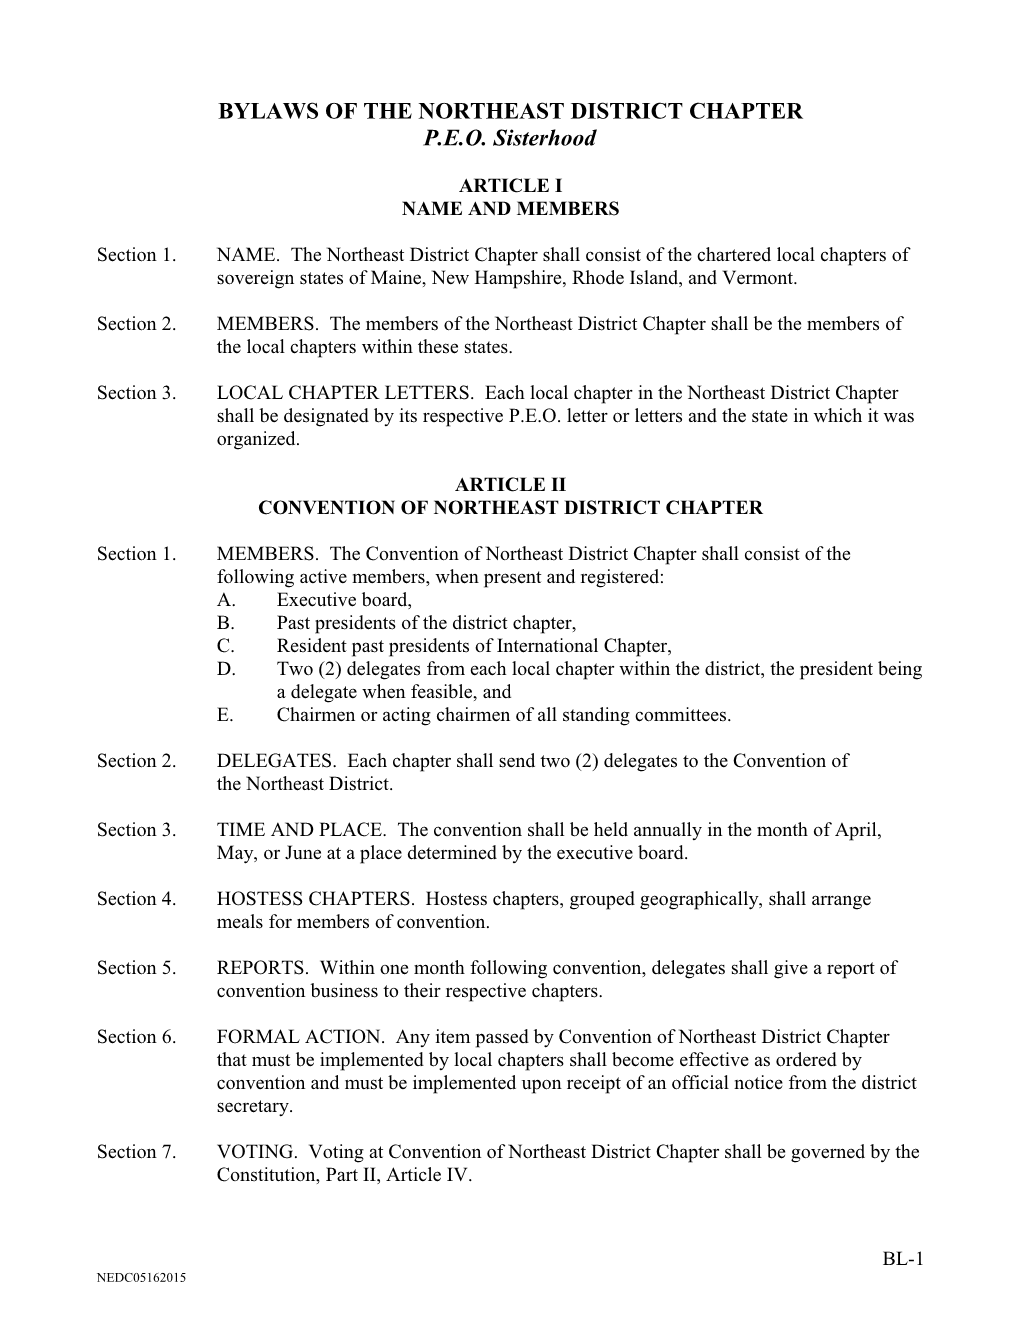 Bylaws of the Northeast District Chapter